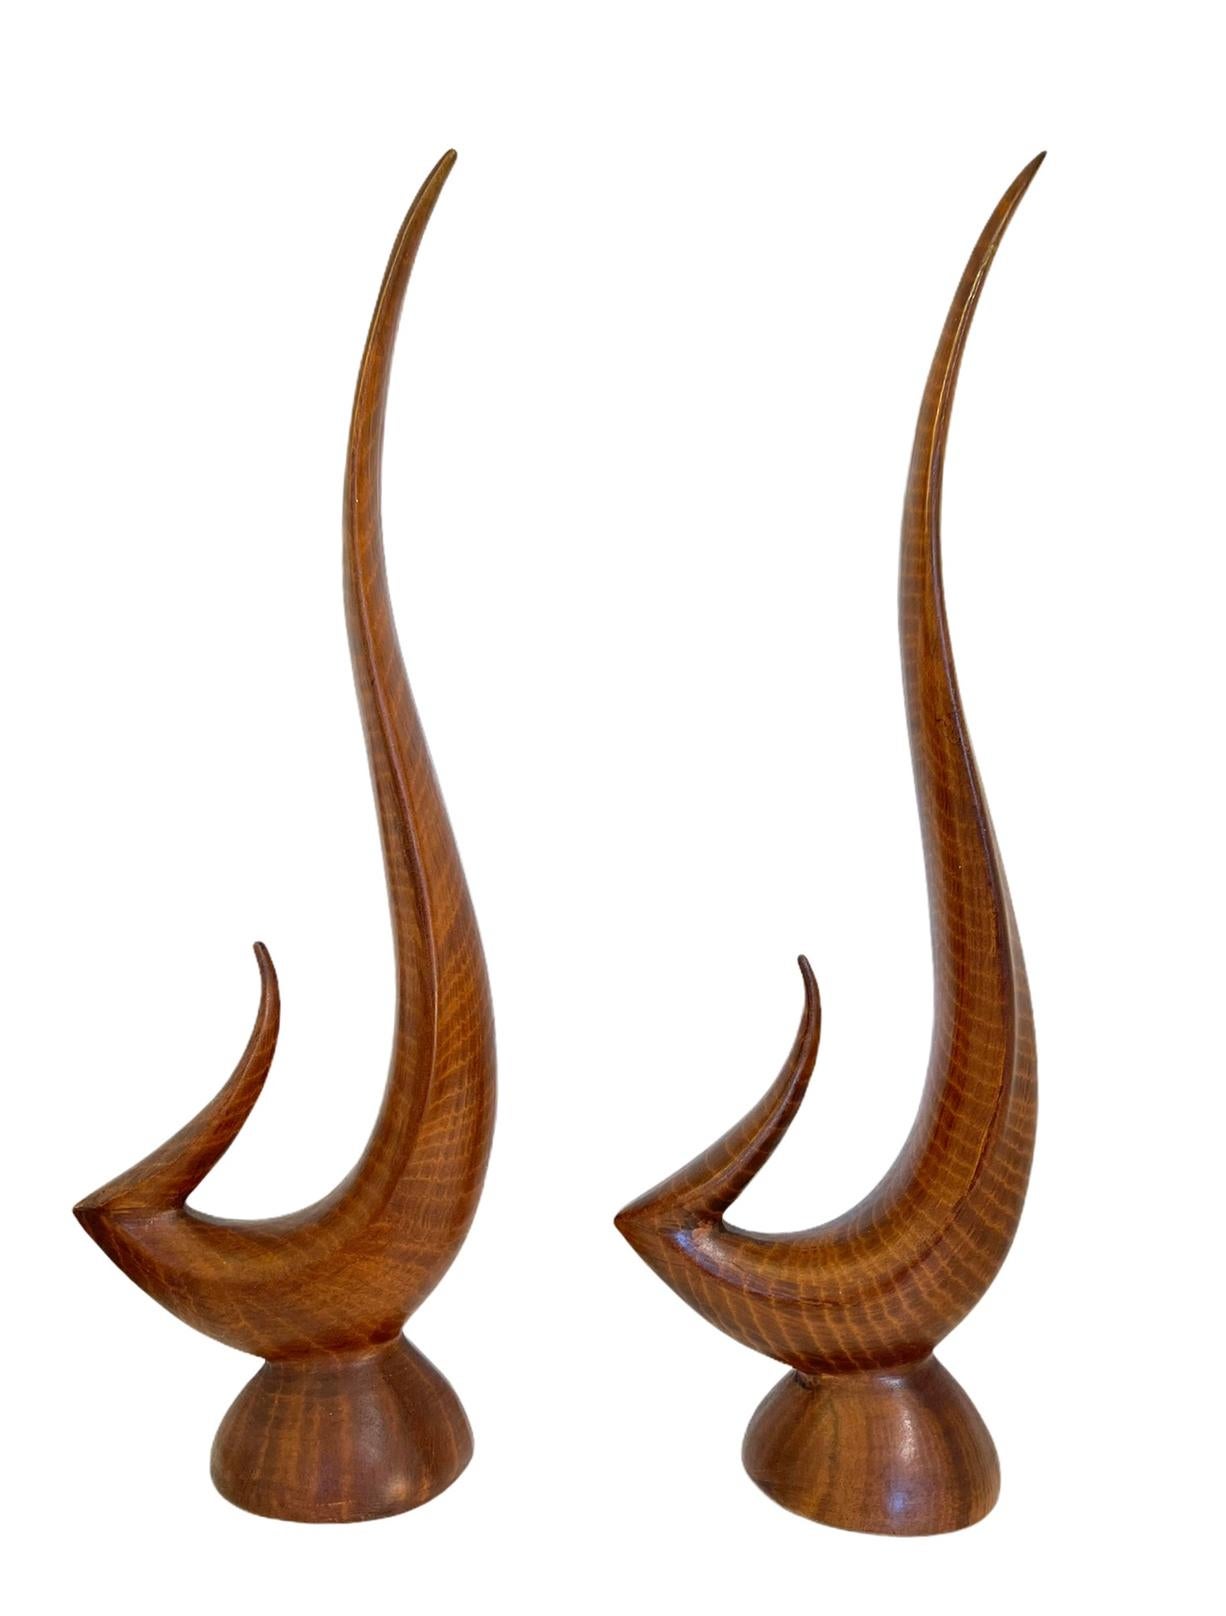 Mid century ceramic faux bois sculpture pair. Add incredible shape and movement to any space. 

Faux bois (from the French for false wood) refers to the artistic imitation of wood or wood grains in various media. The craft has roots in the